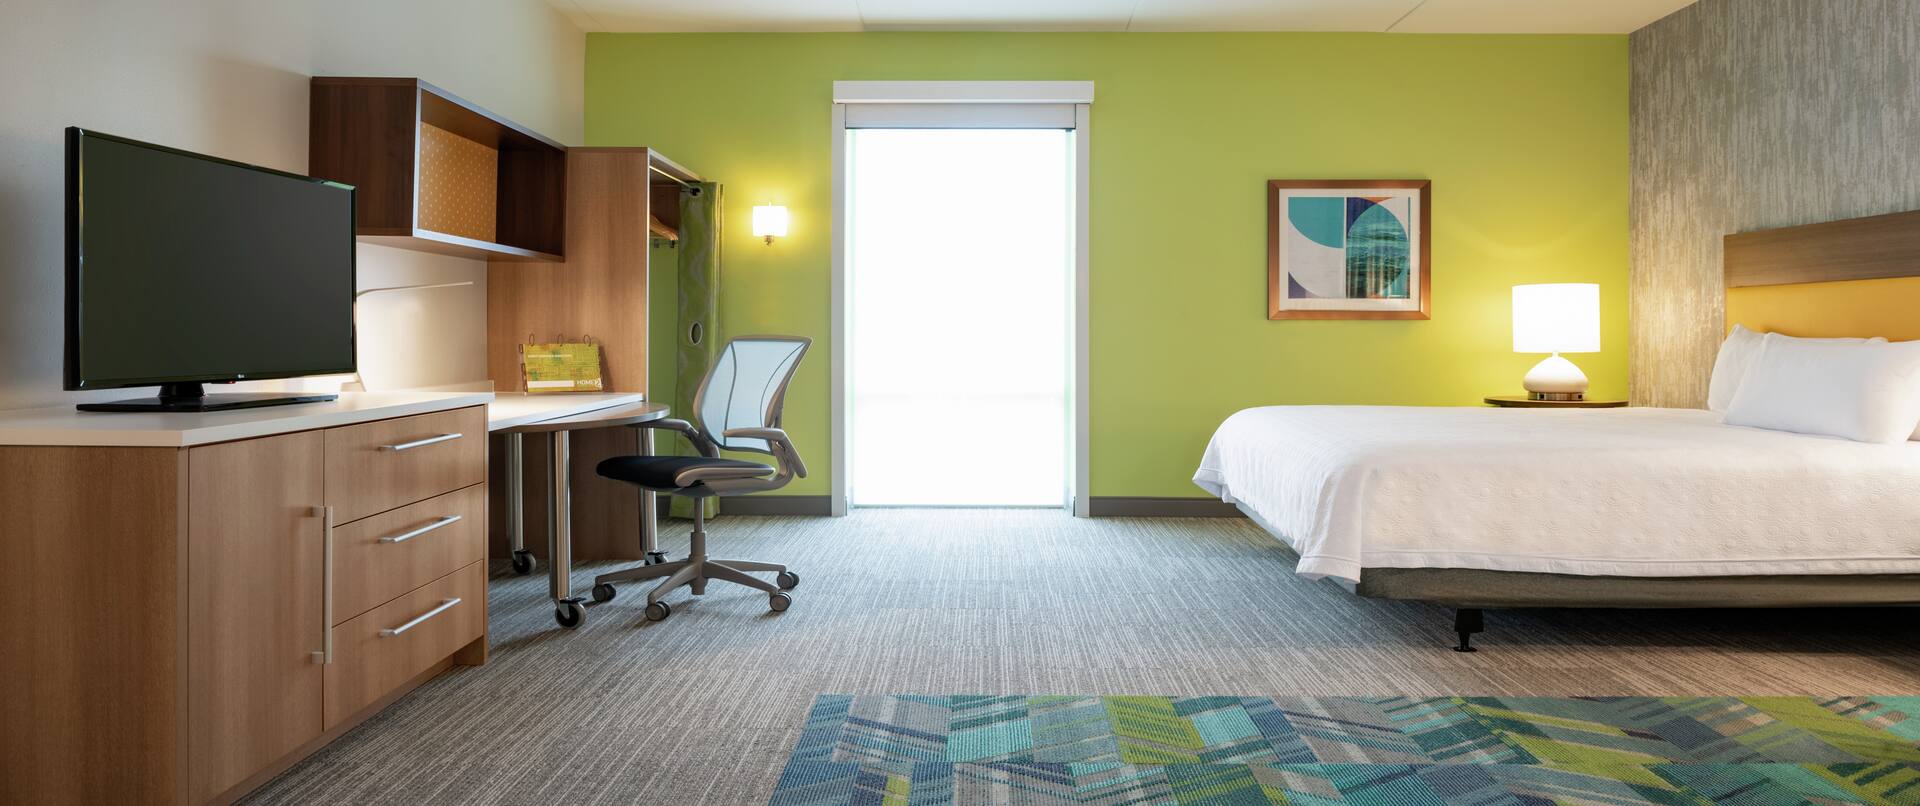 Spacious accessible suite featuring TV, work desk with ergonomic chair, and comfortable king bed.